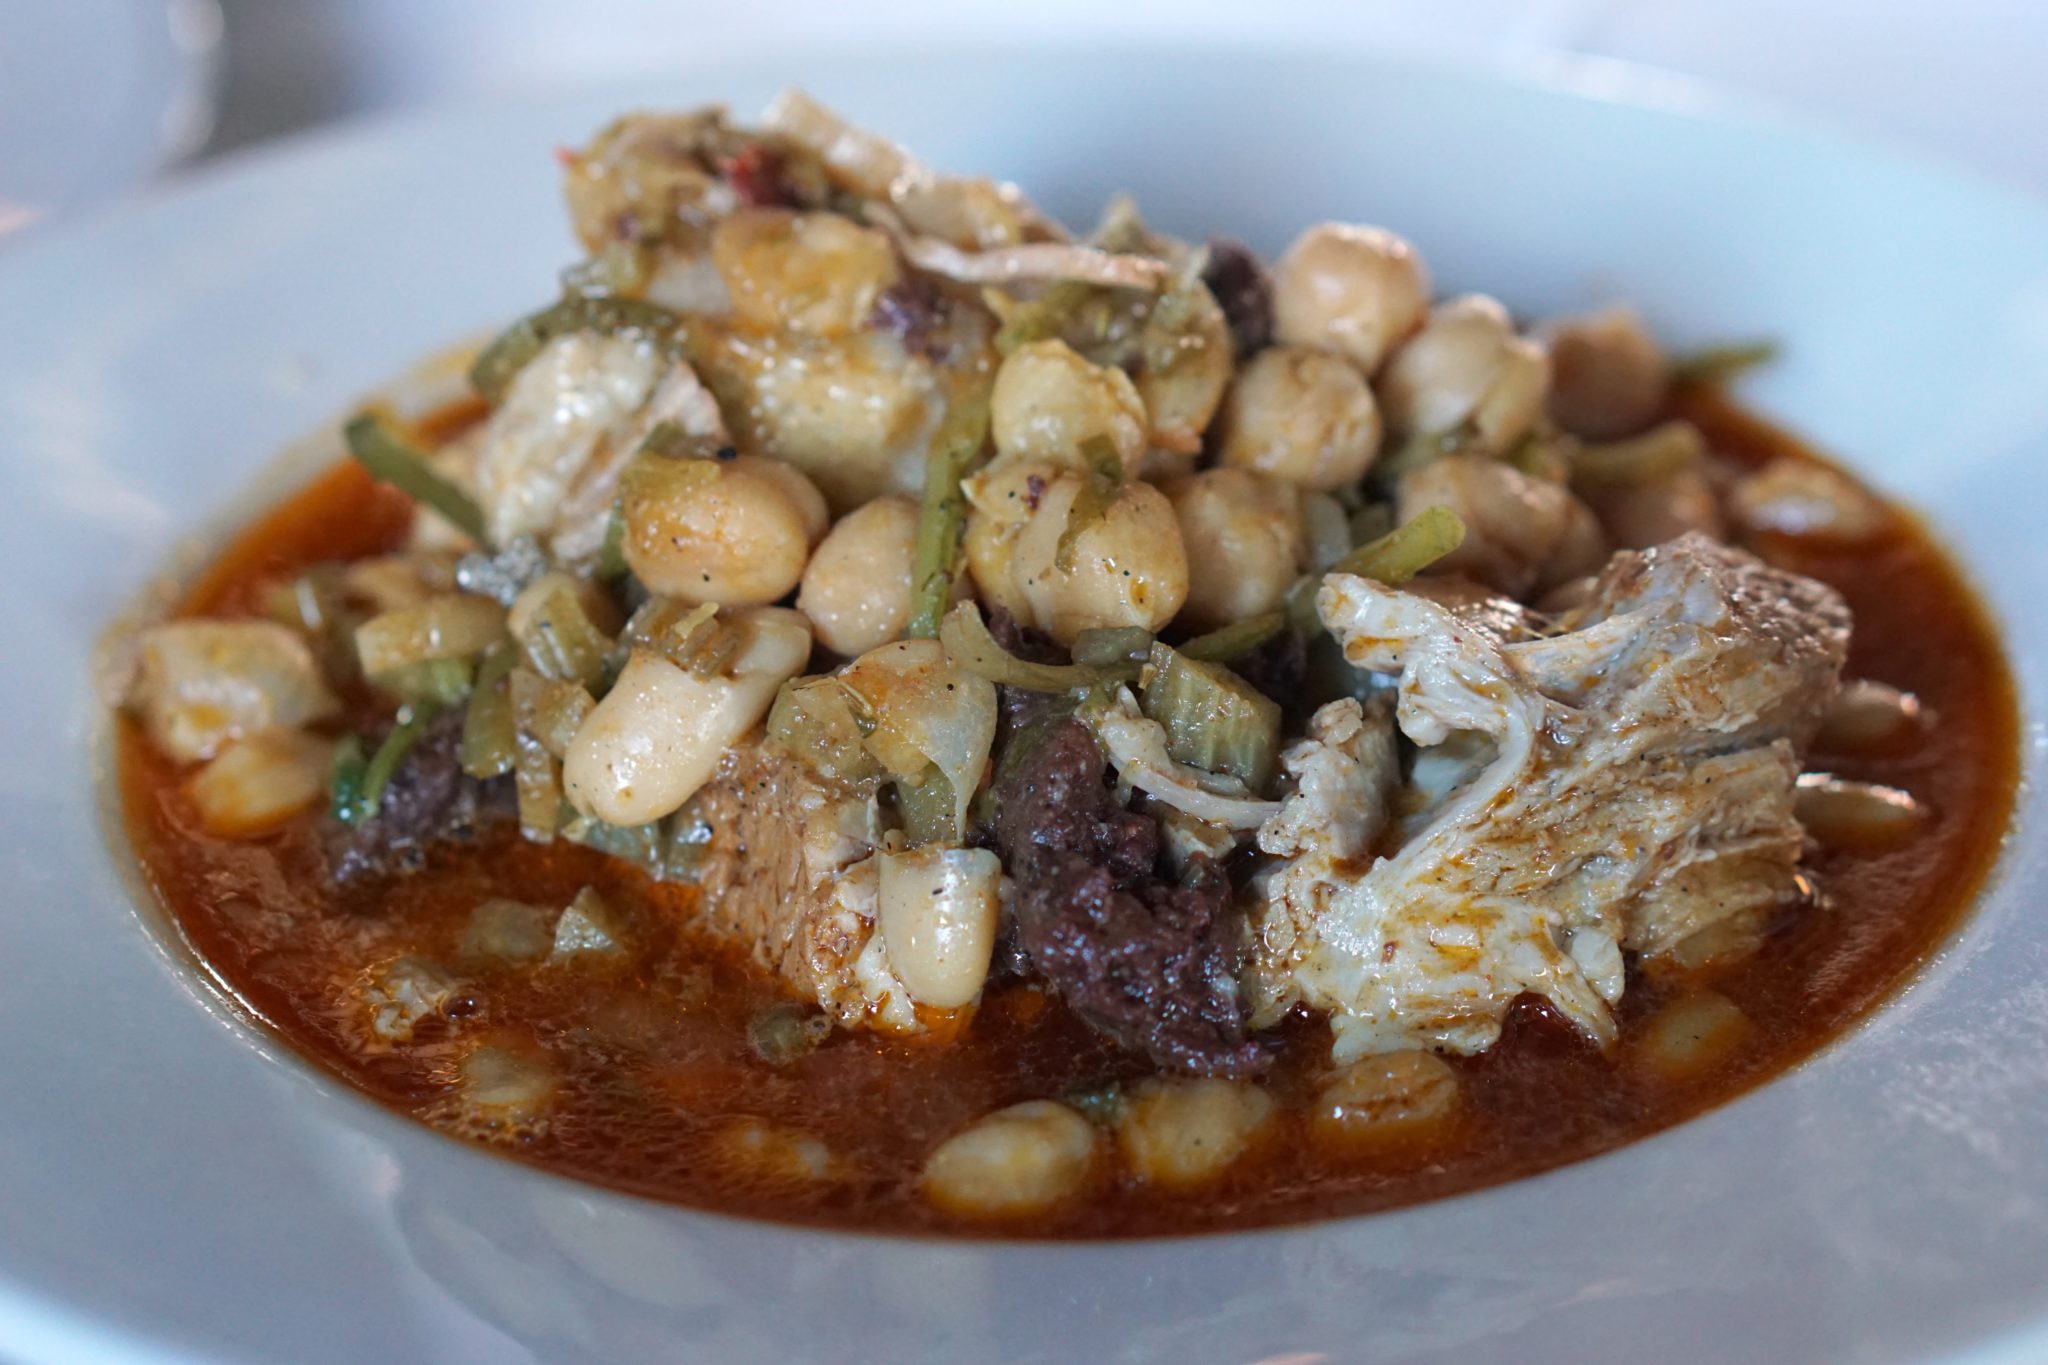 If you're wondering where to eat in Jerez, one of our top picks is Venta Esteban, where they serve delicious traditional dishes like this berza jerezana.